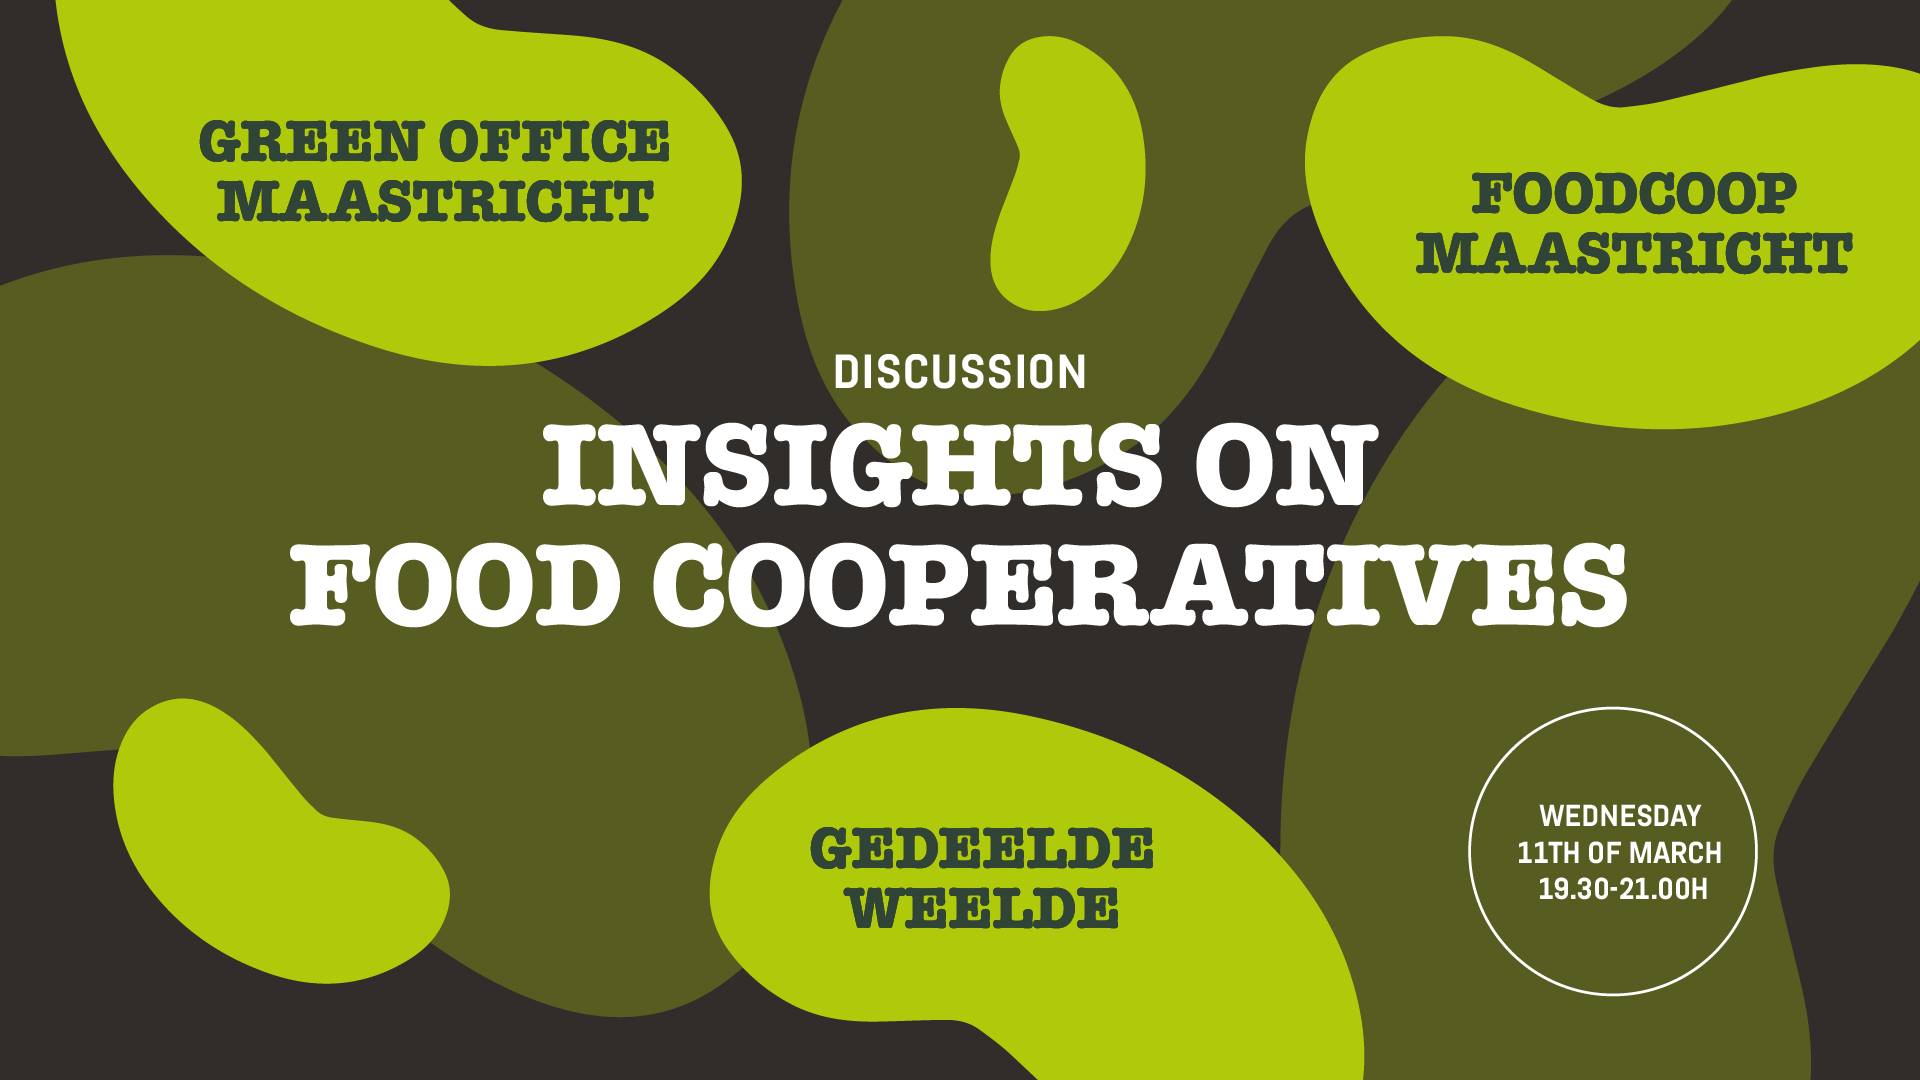 Food cooperatives